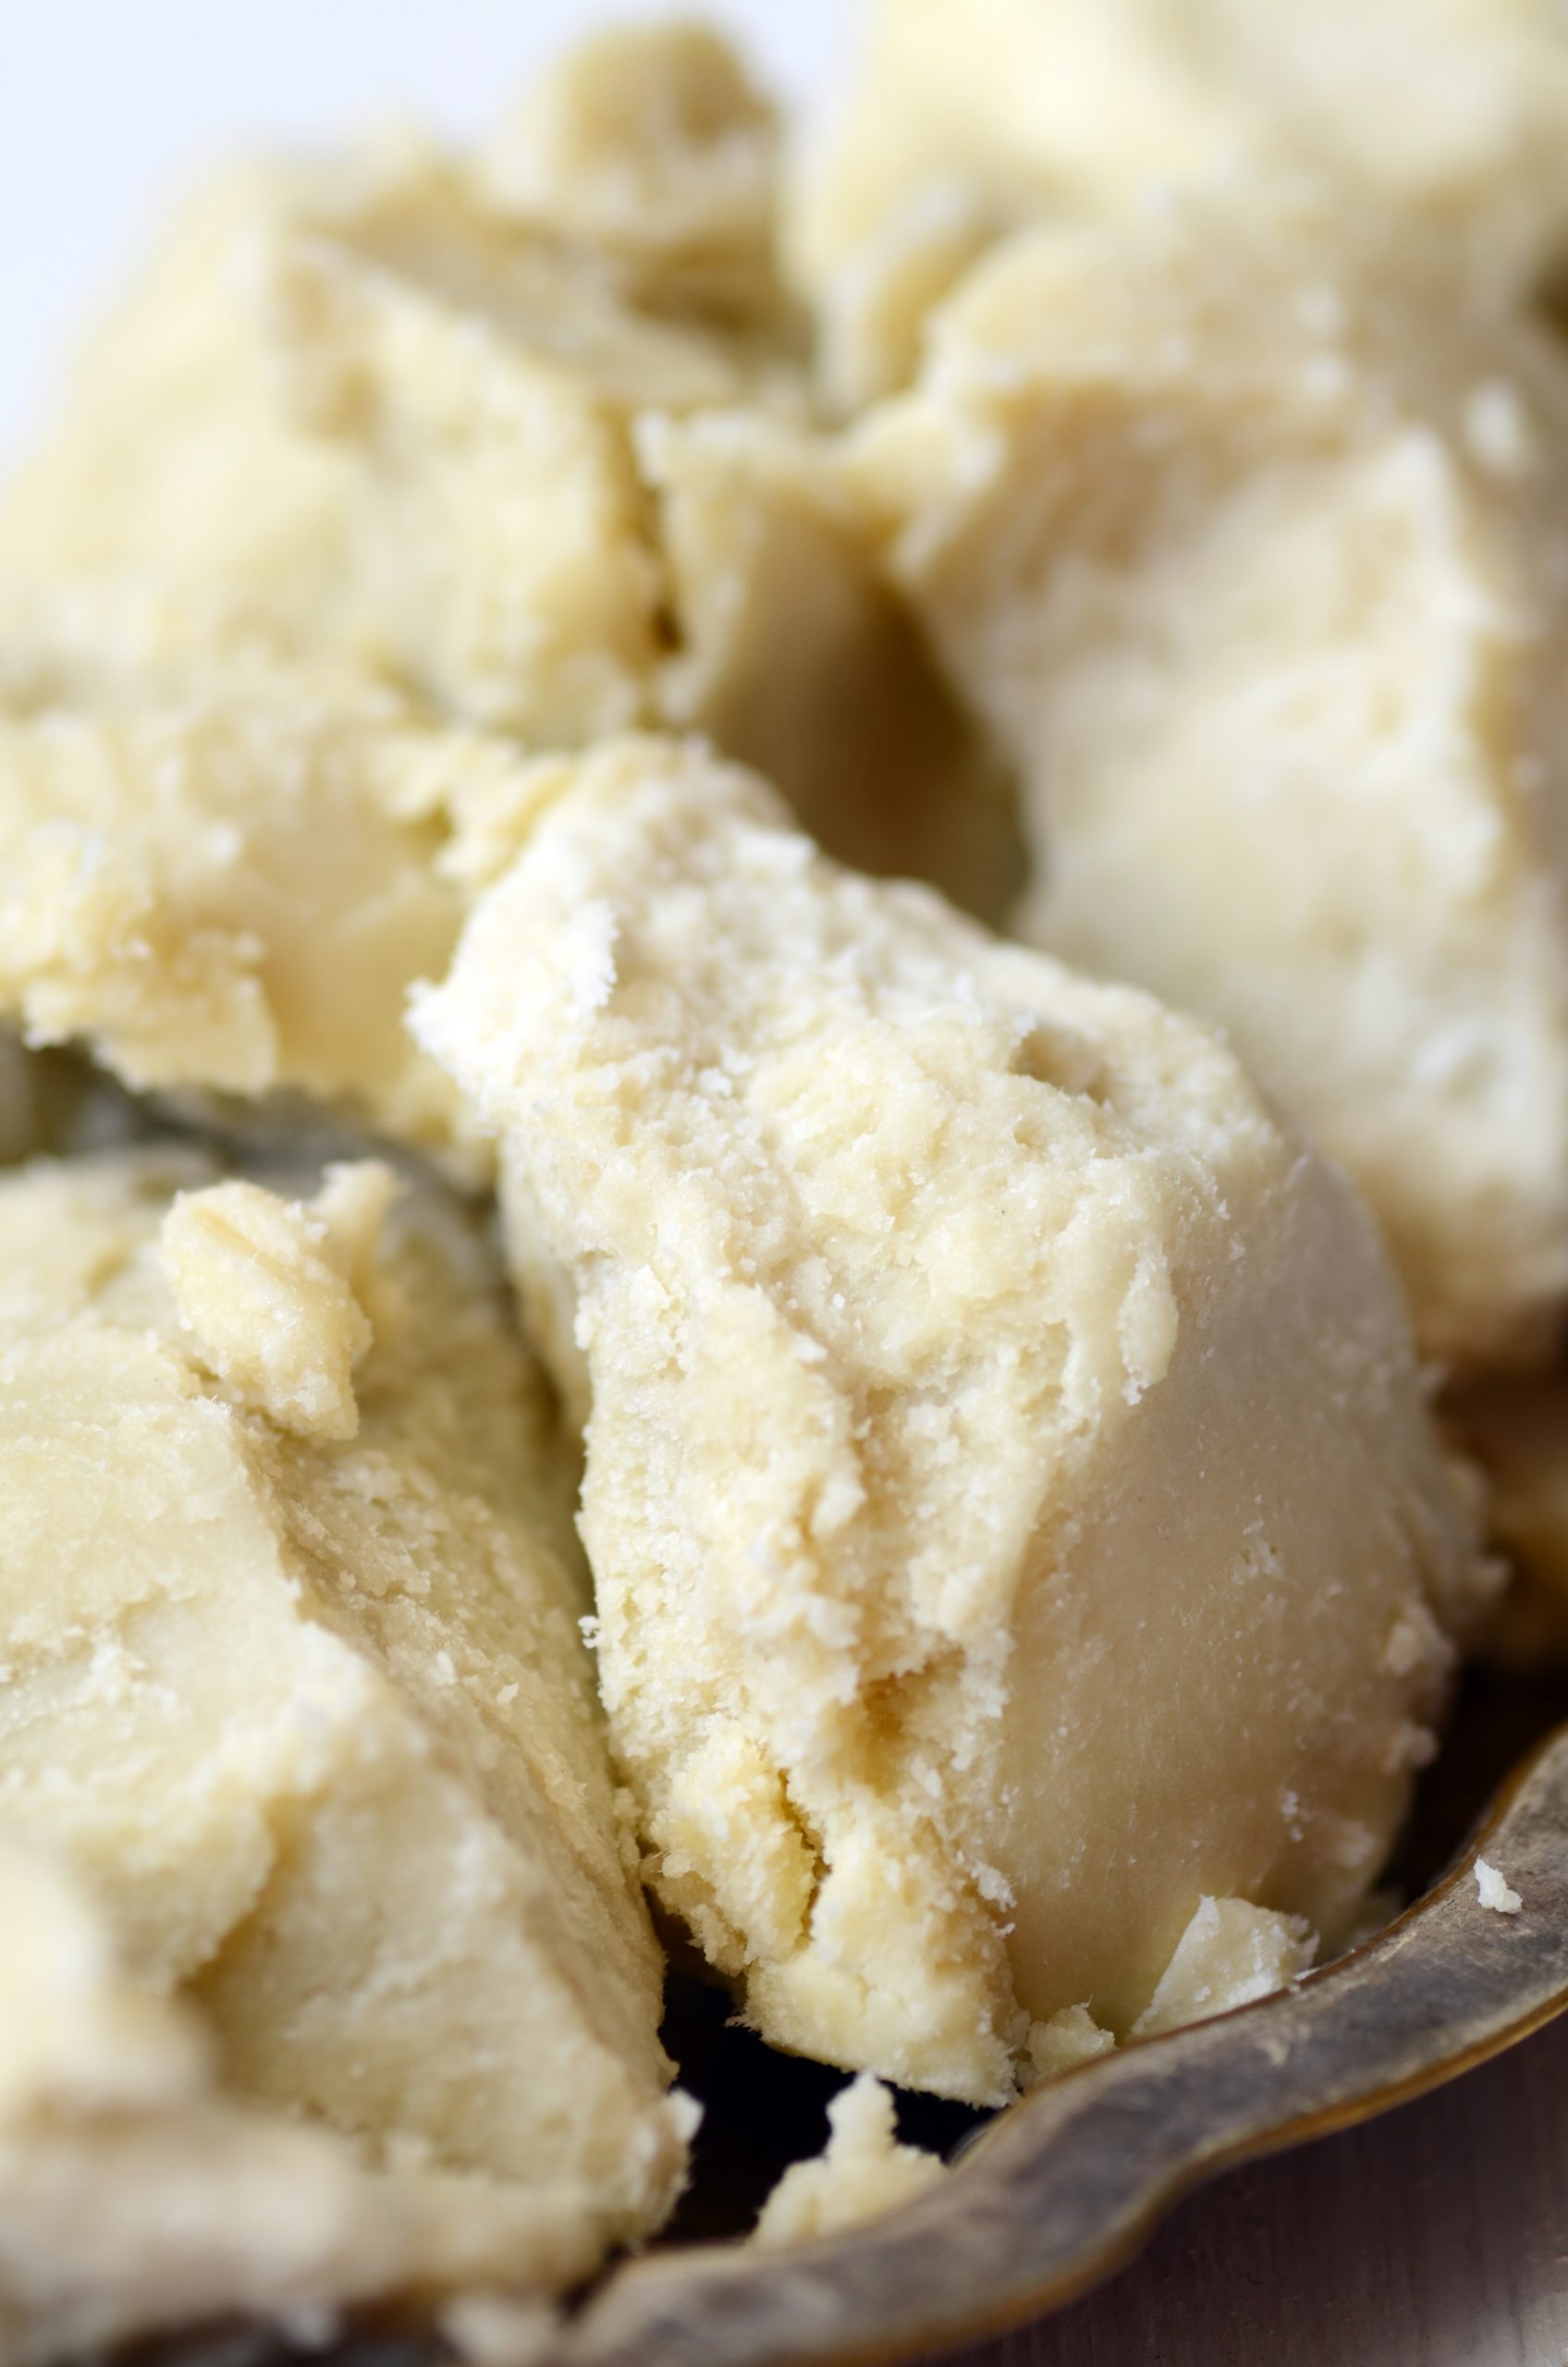 Is Shea Butter good for psoriasis?